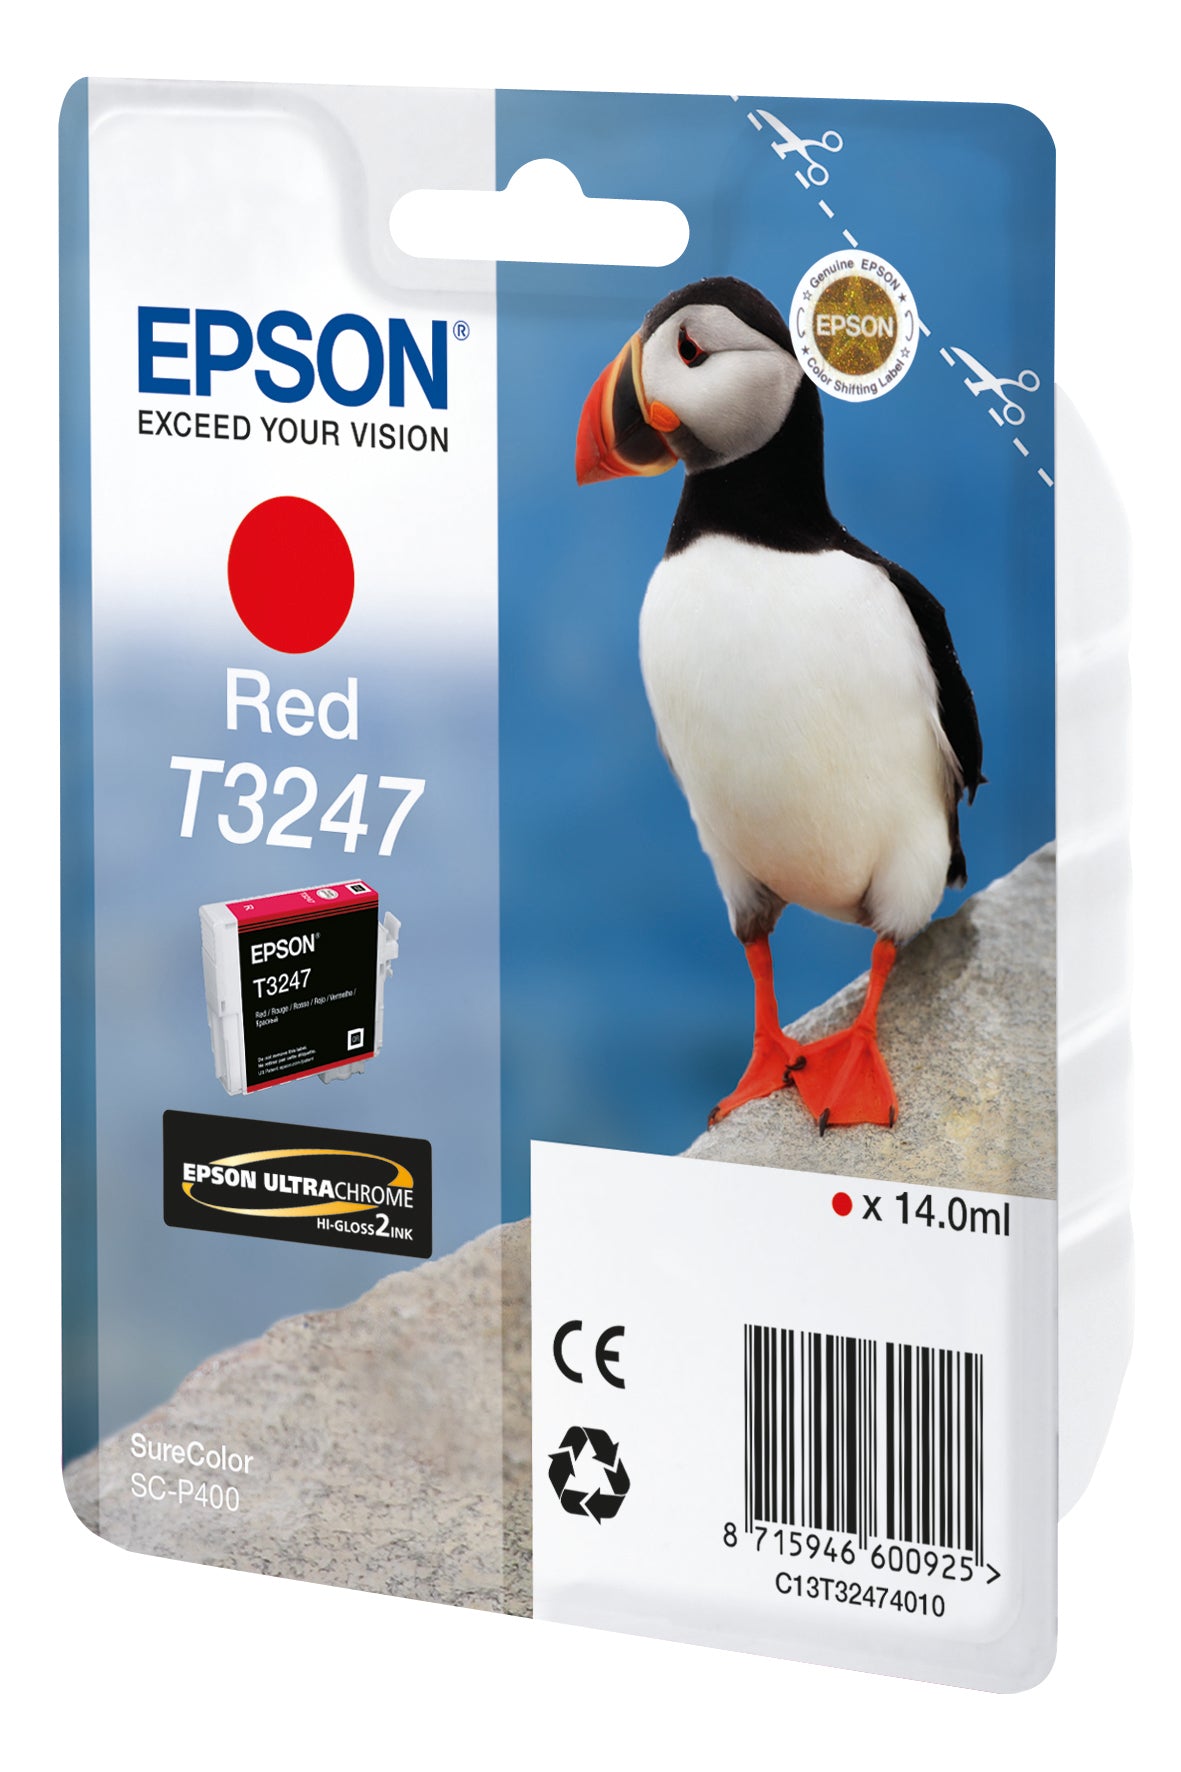 Epson C13T32474010/T3247 Ink cartridge red, 980 pages 14ml for Epson SC-P 400